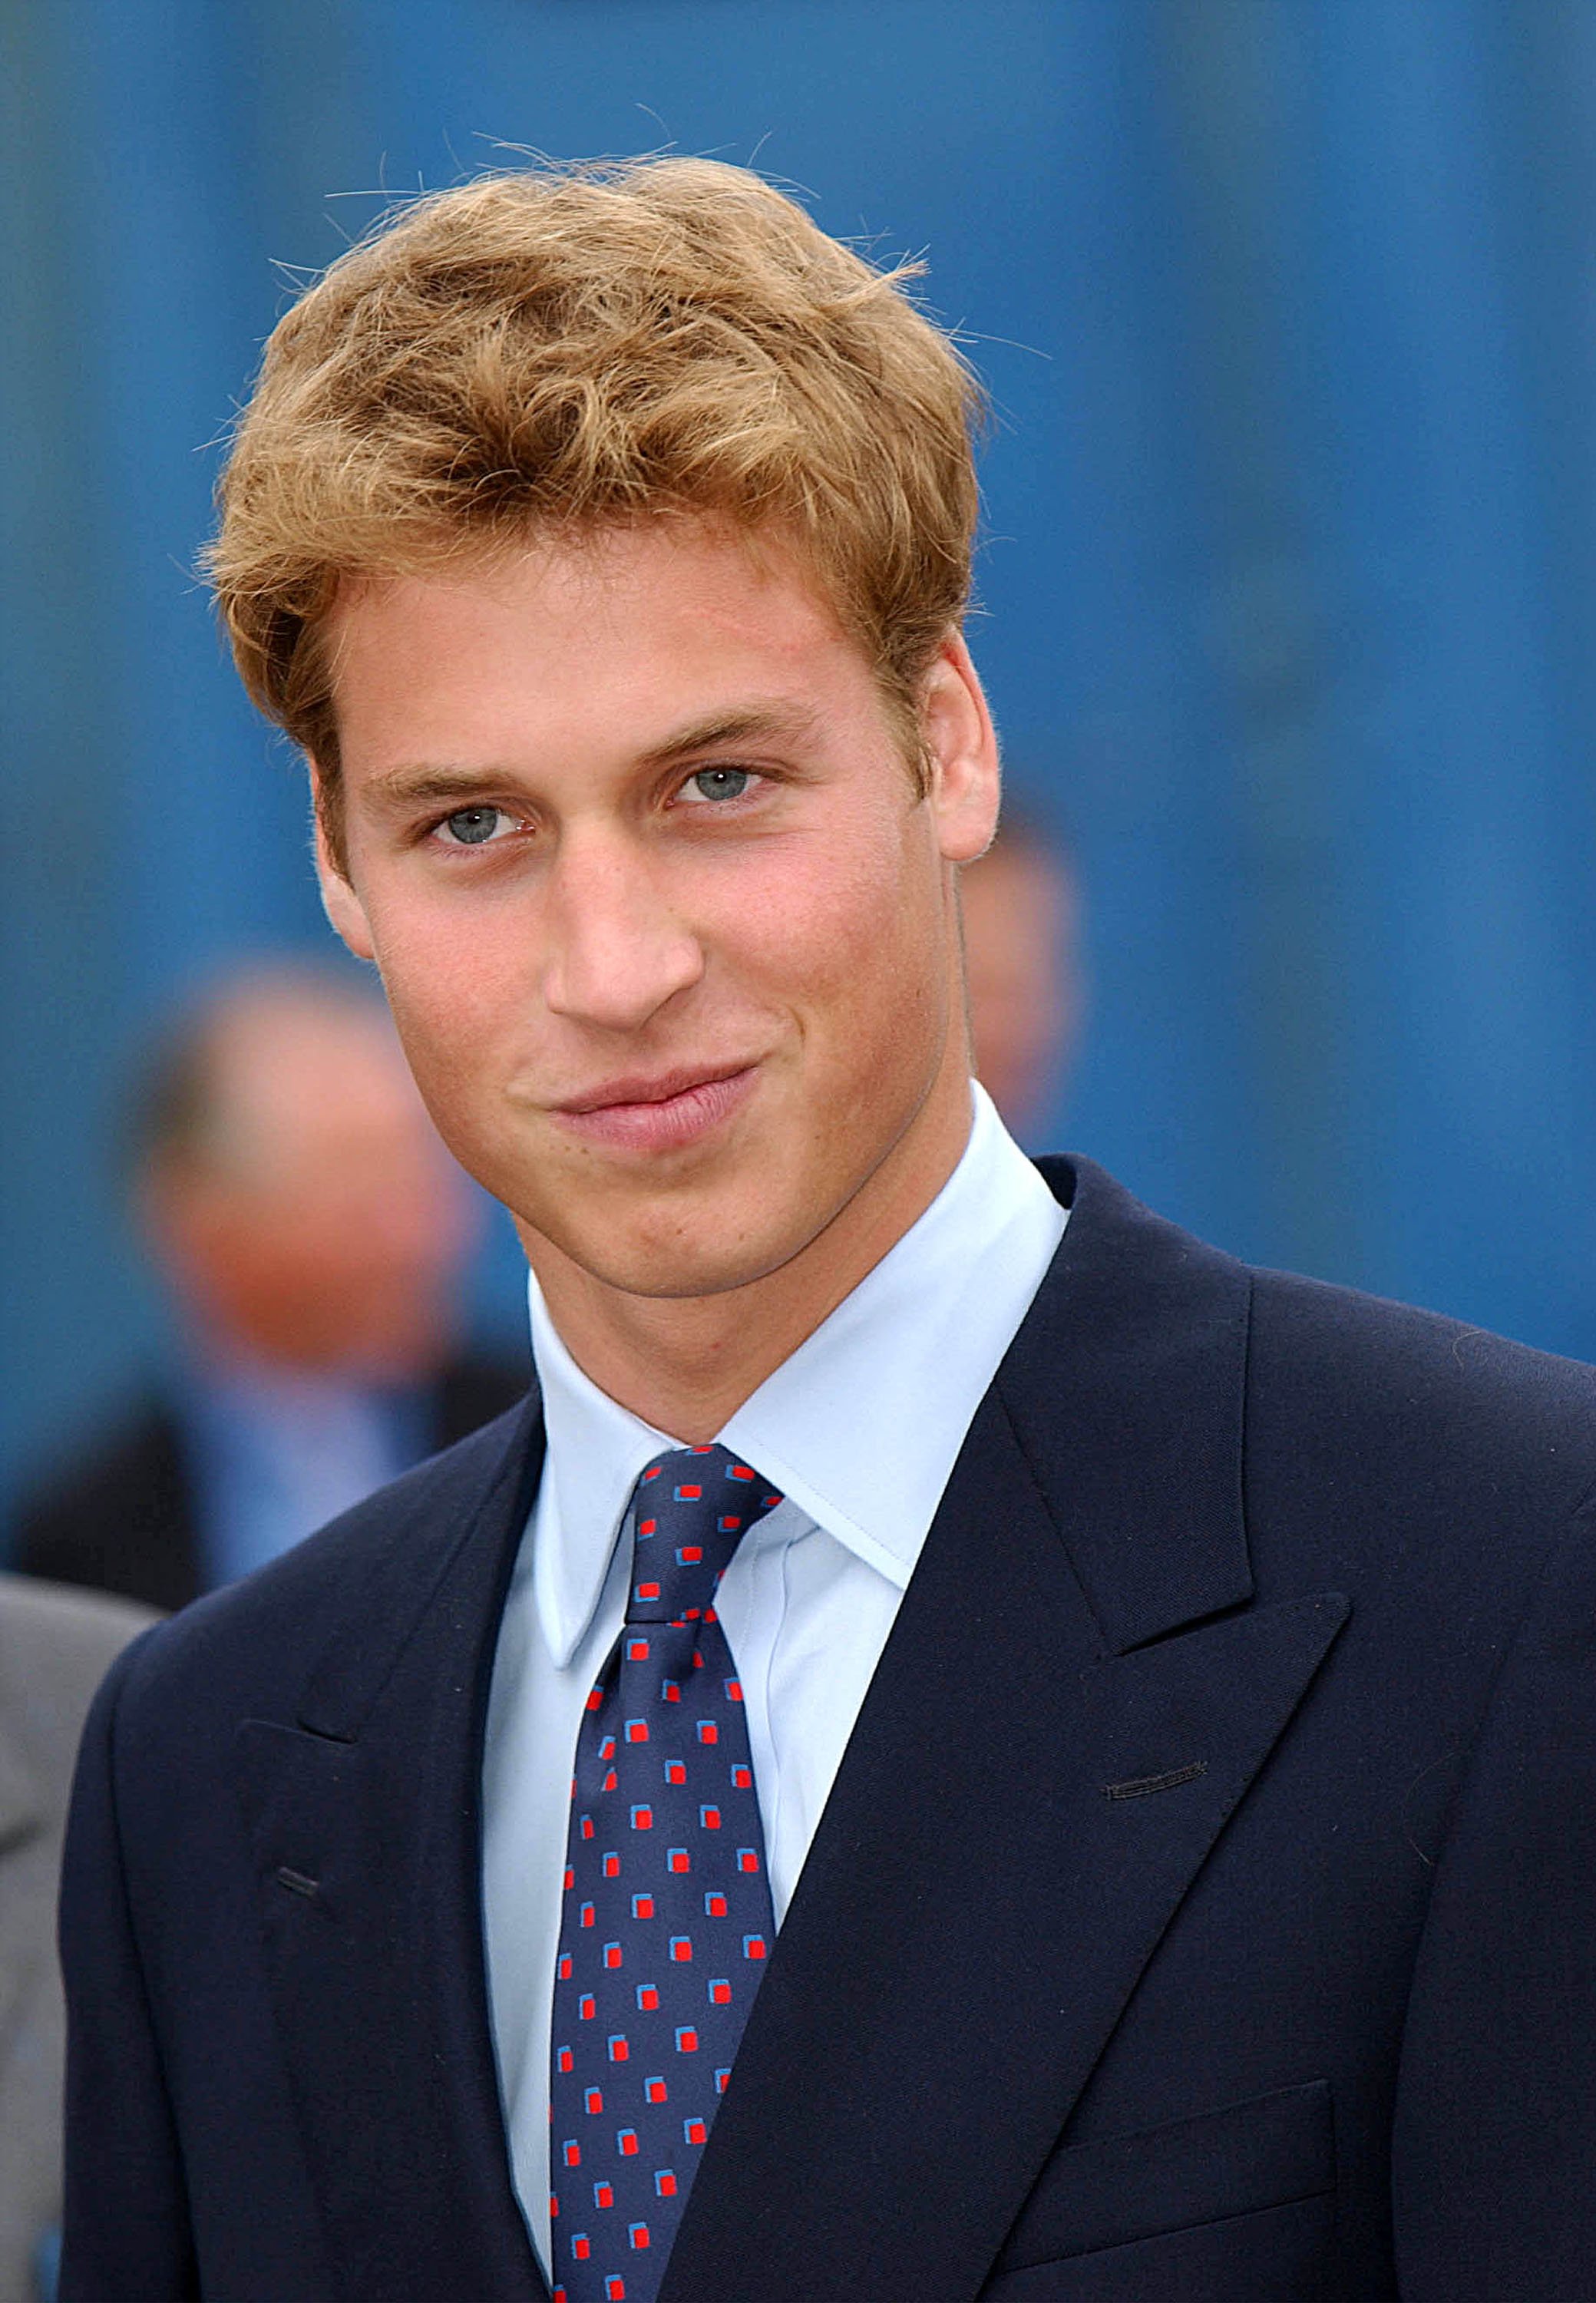 Le prince William | photo : Getty Images